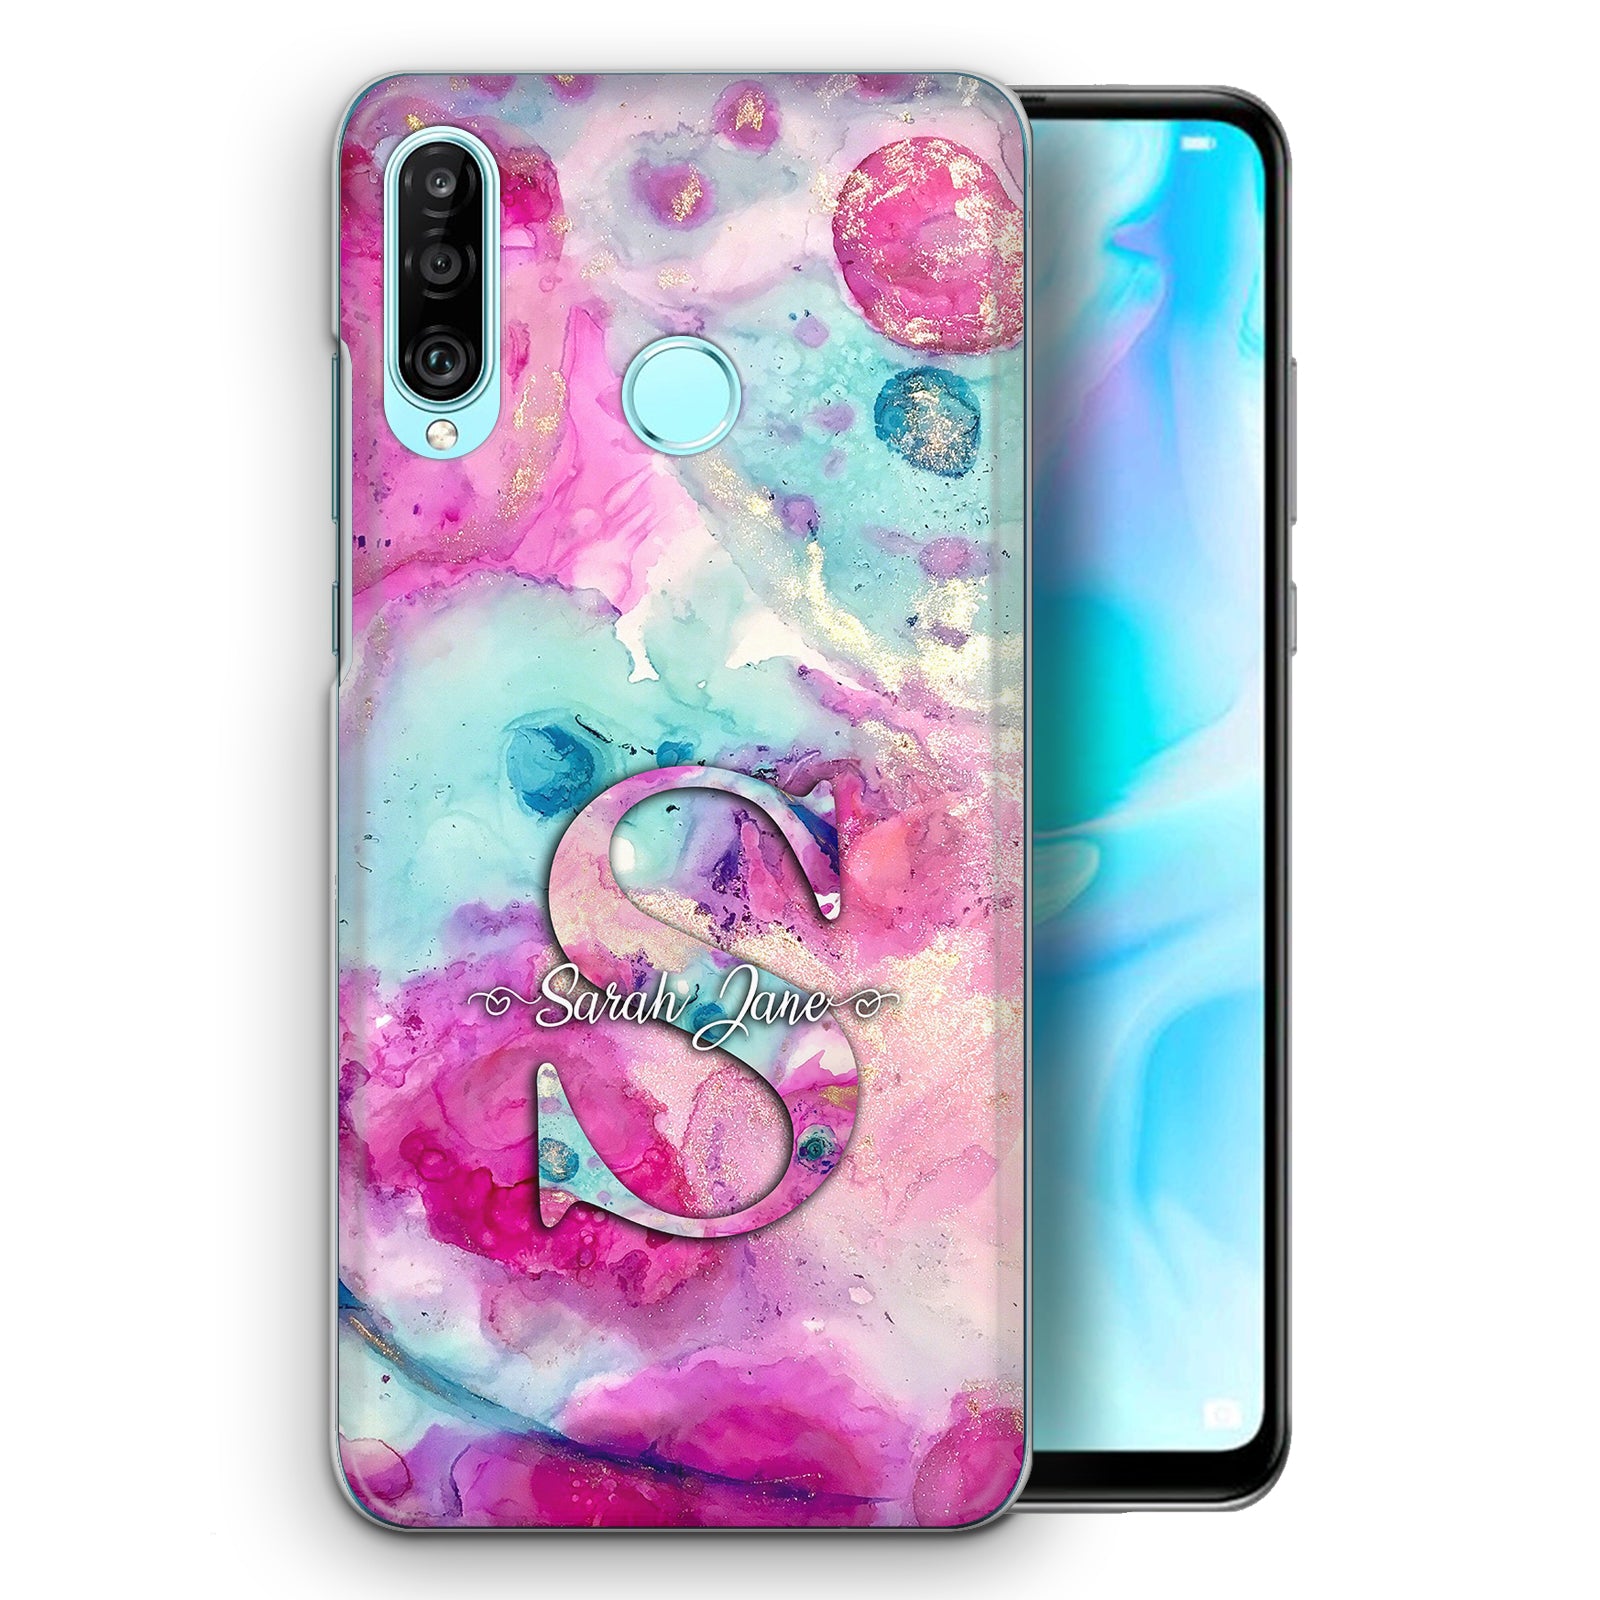 Personalised Honor Phone Hard Case with Textured Monogram and Name on Pink Swirl Marble